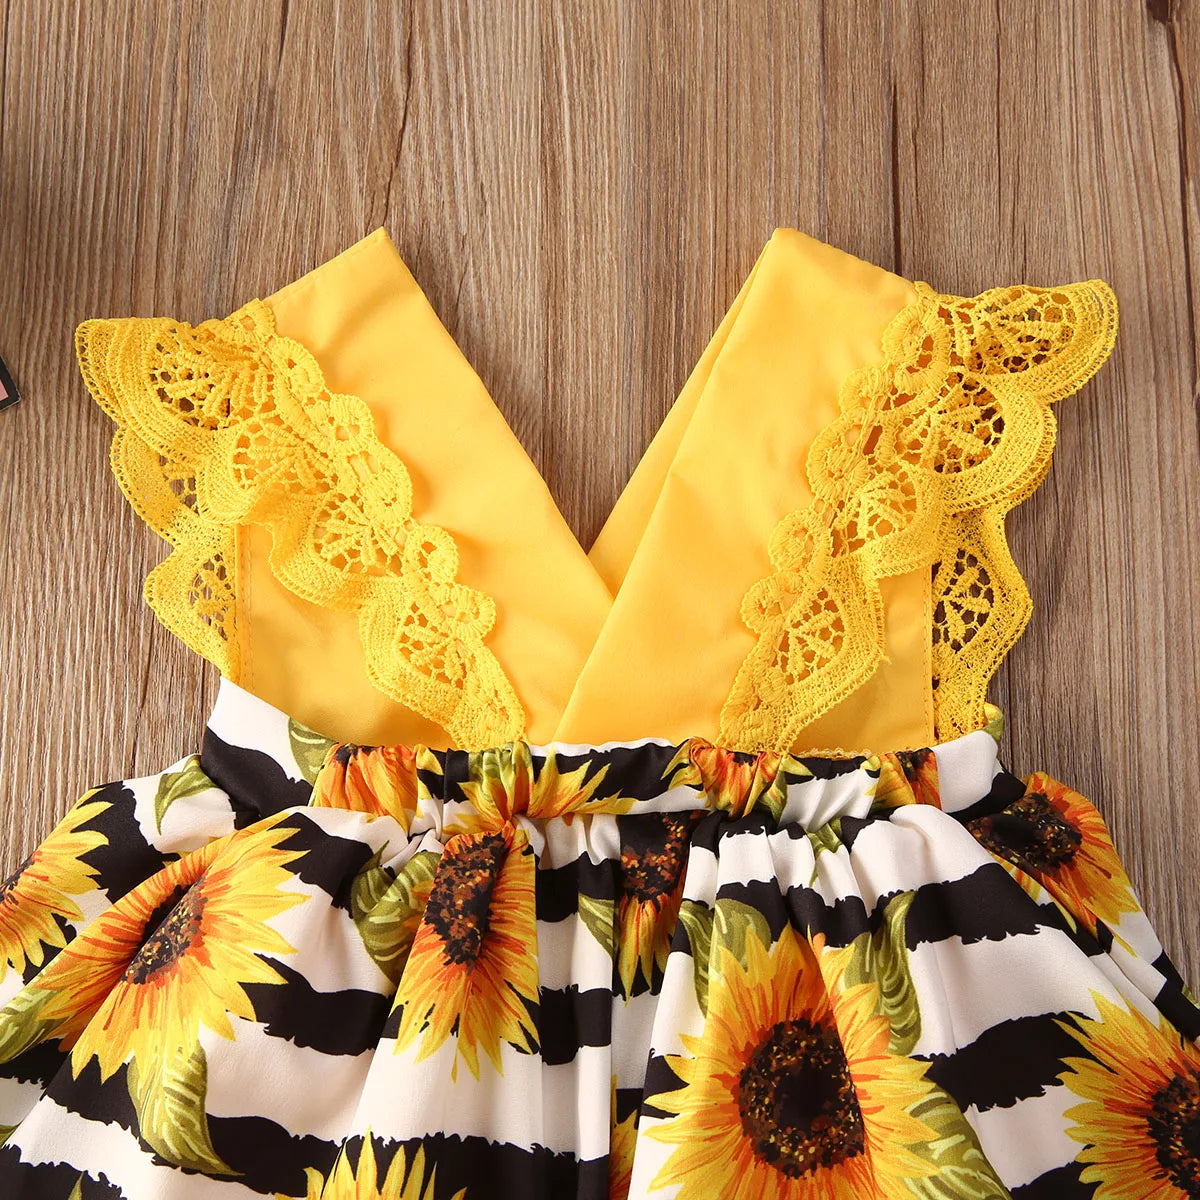 Newborn Baby Girl Clothes Lace Ruffle Sunflower Print Romper Headband 2Pcs Summer Sleeveless Outfits Sunsuit for 0-24Months